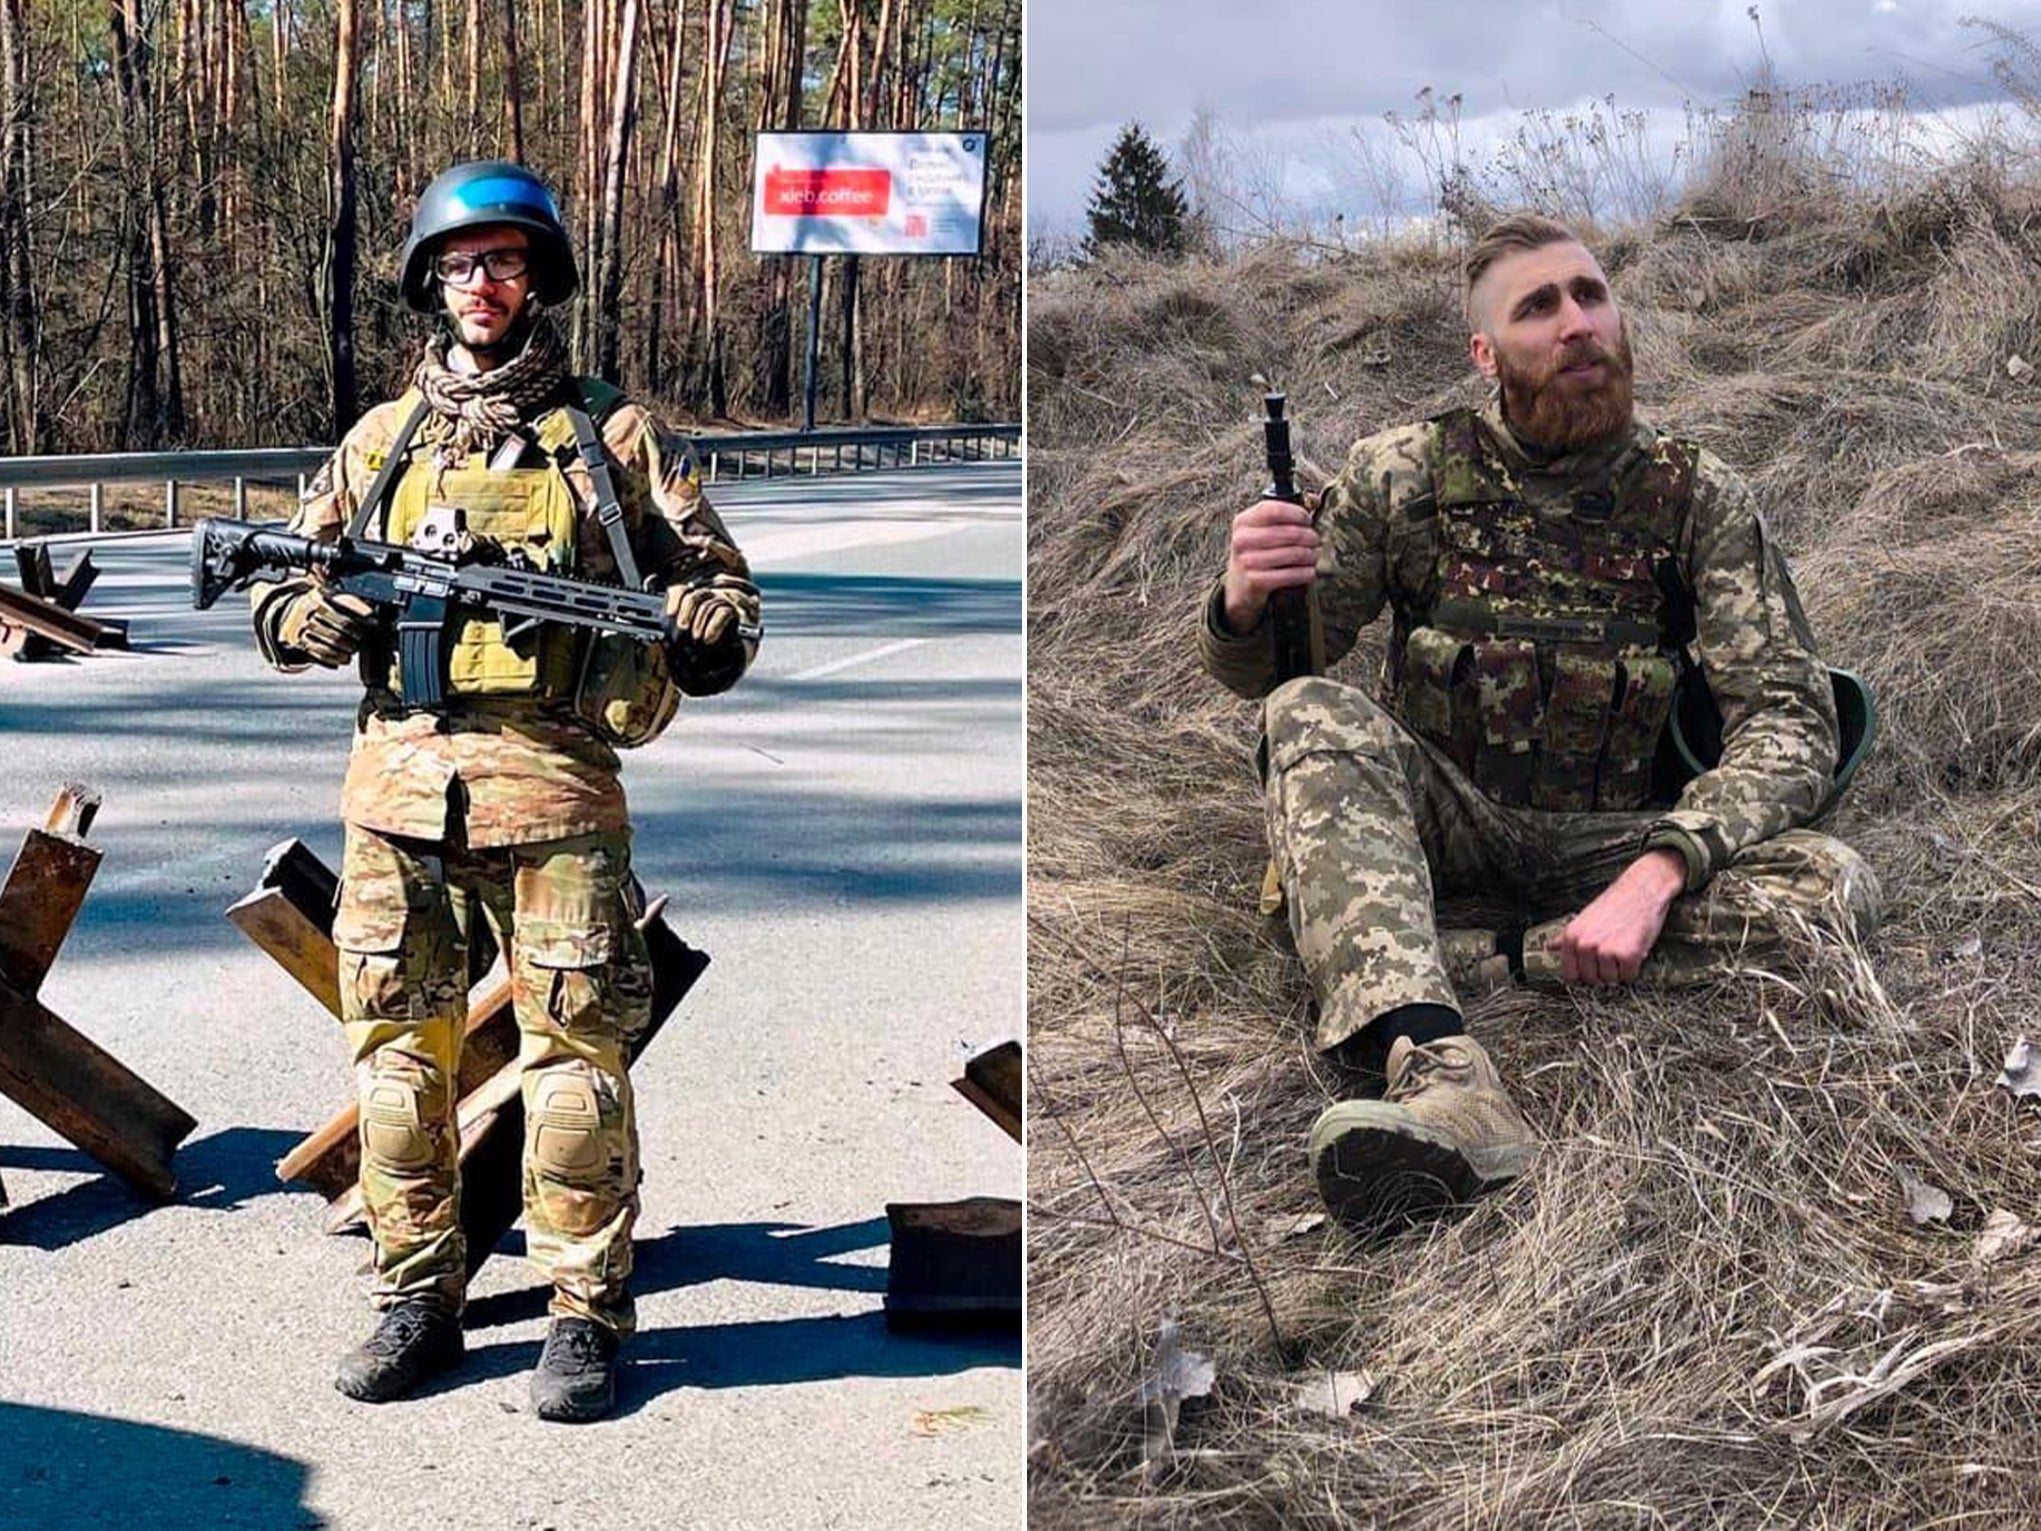 Artem (left) and Pavlo (right) both signed up to fight against the Russian invasion of Ukraine